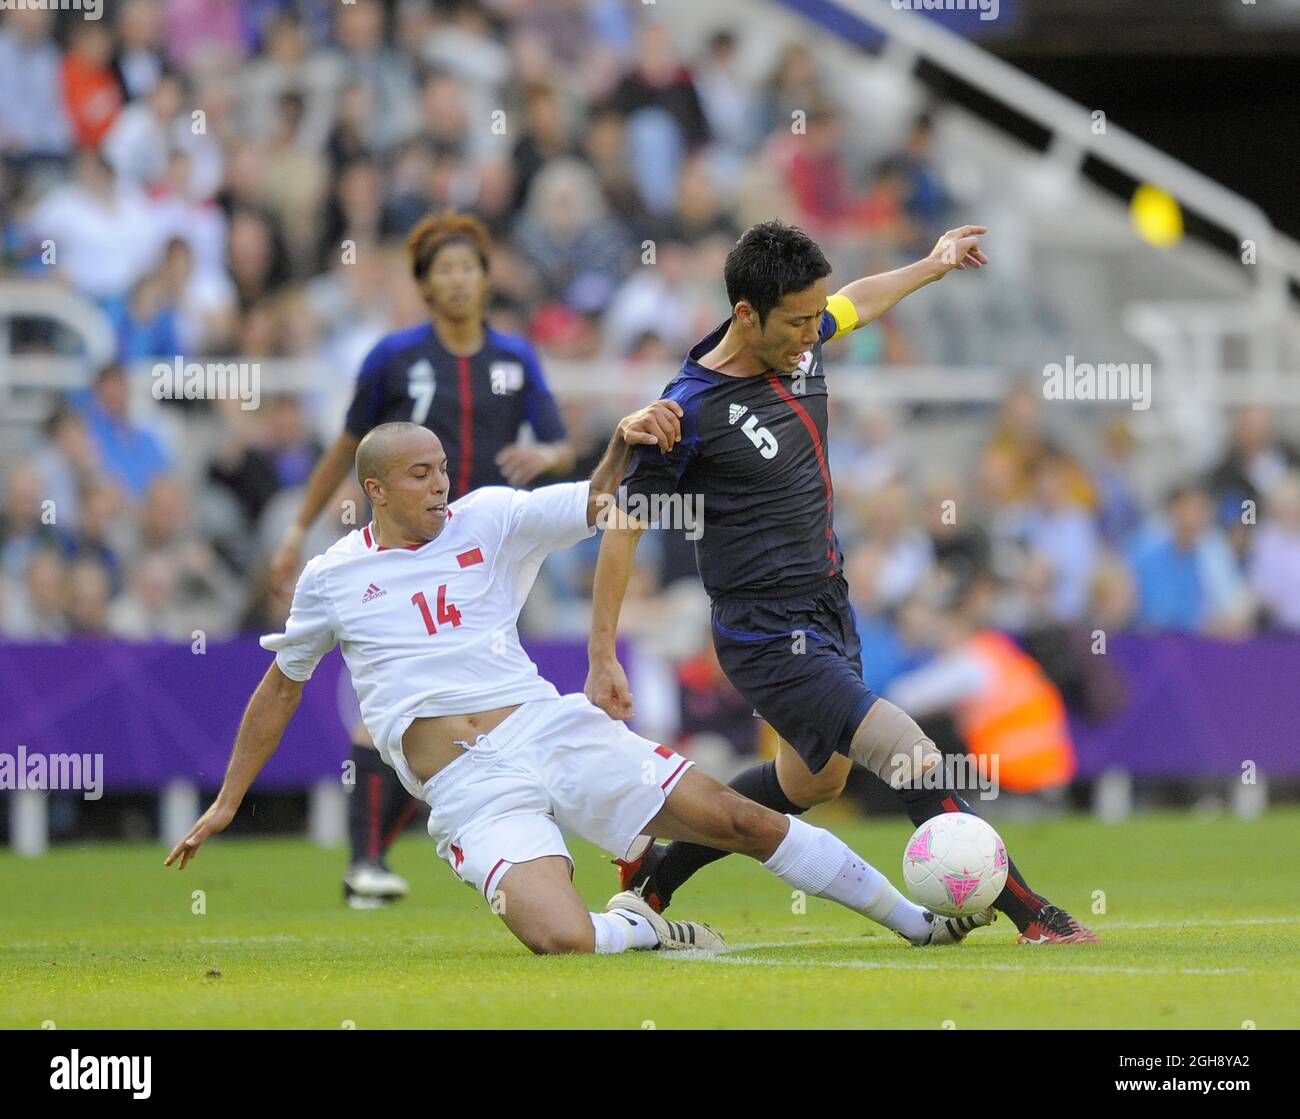 Morocco's Houssine Kharja (L) tackles Japan's Maya Yoshida during the London Olympic 2012 Group D men's match between Japan v Morocco at the St. James' Park, Newcastle upon Tyne on the 29th July 2012. Stock Photo